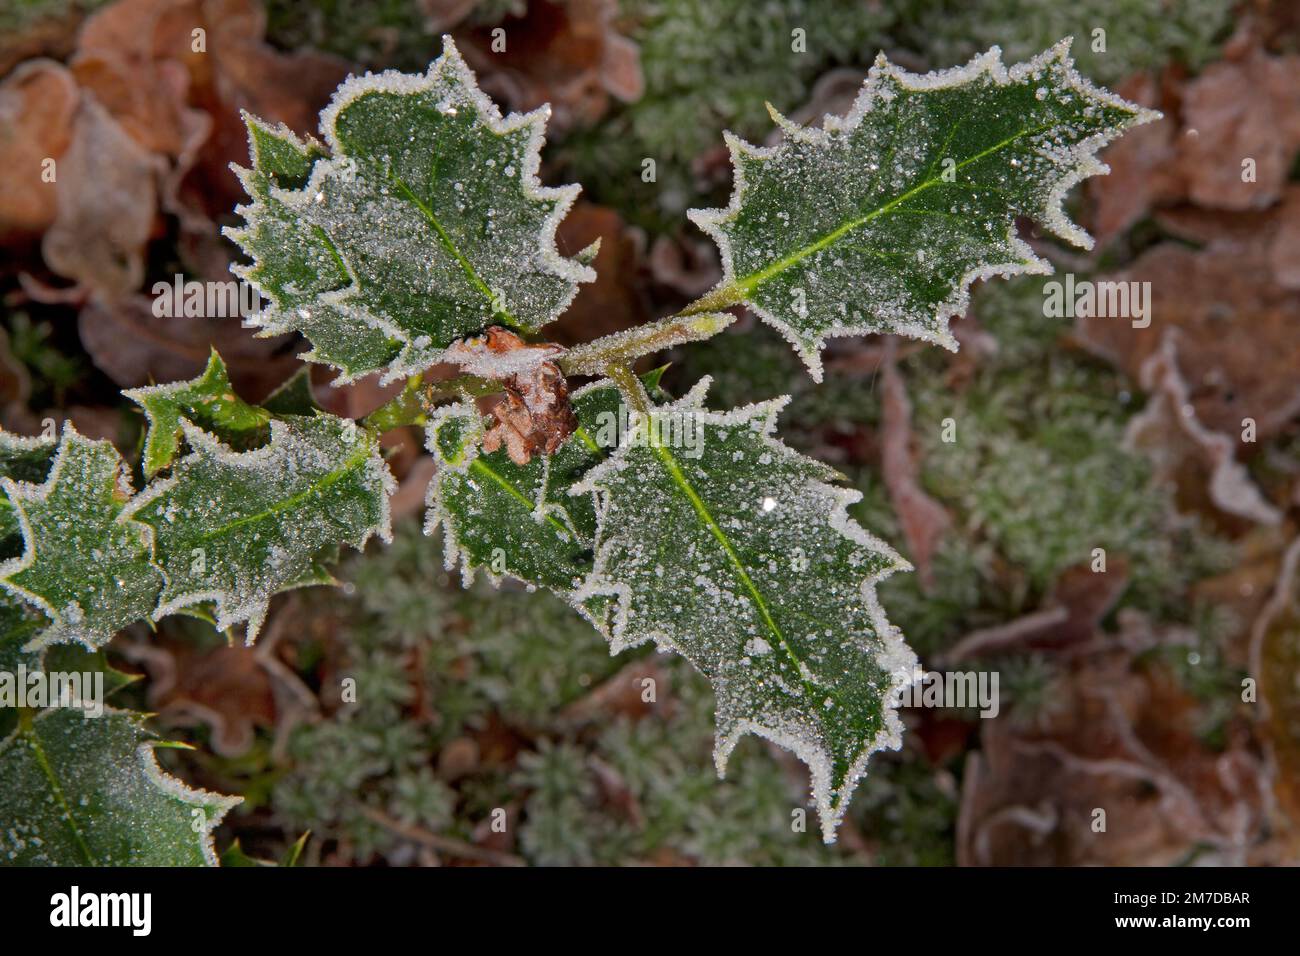 Branch of Holly with ice crystals on the edges and on the spines of the leaves Stock Photo